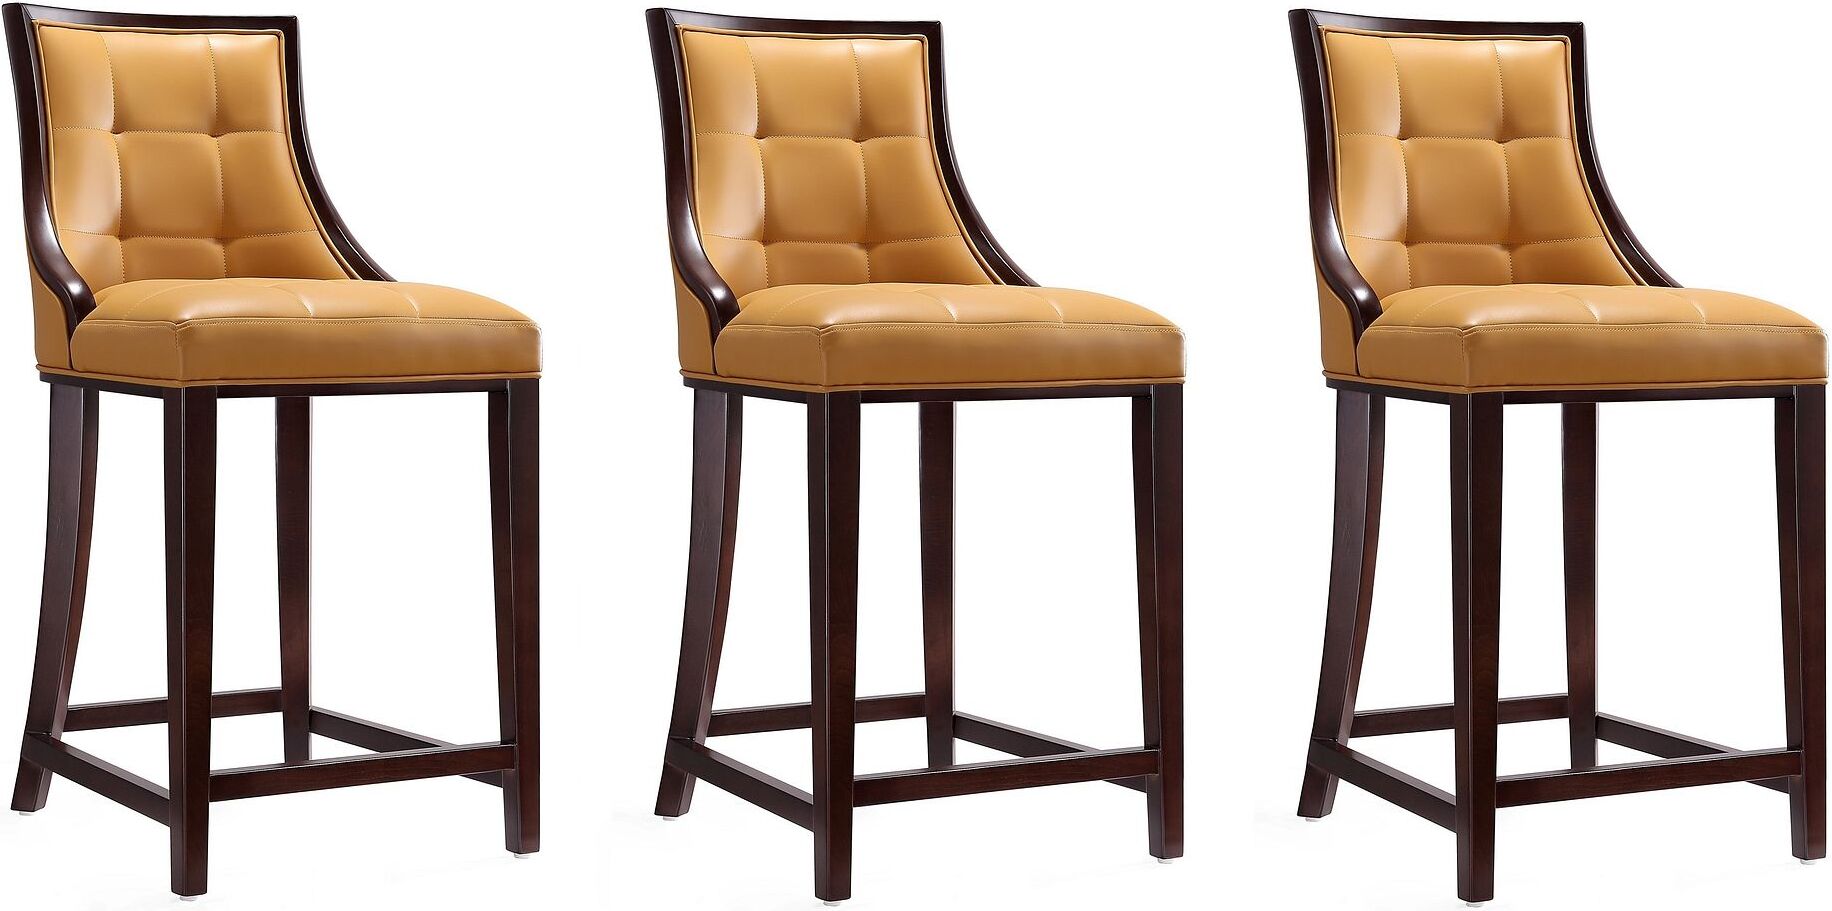 Fifth Ave Counter Stool In Camel And, Camel Leather Bar Stools Set Of 3